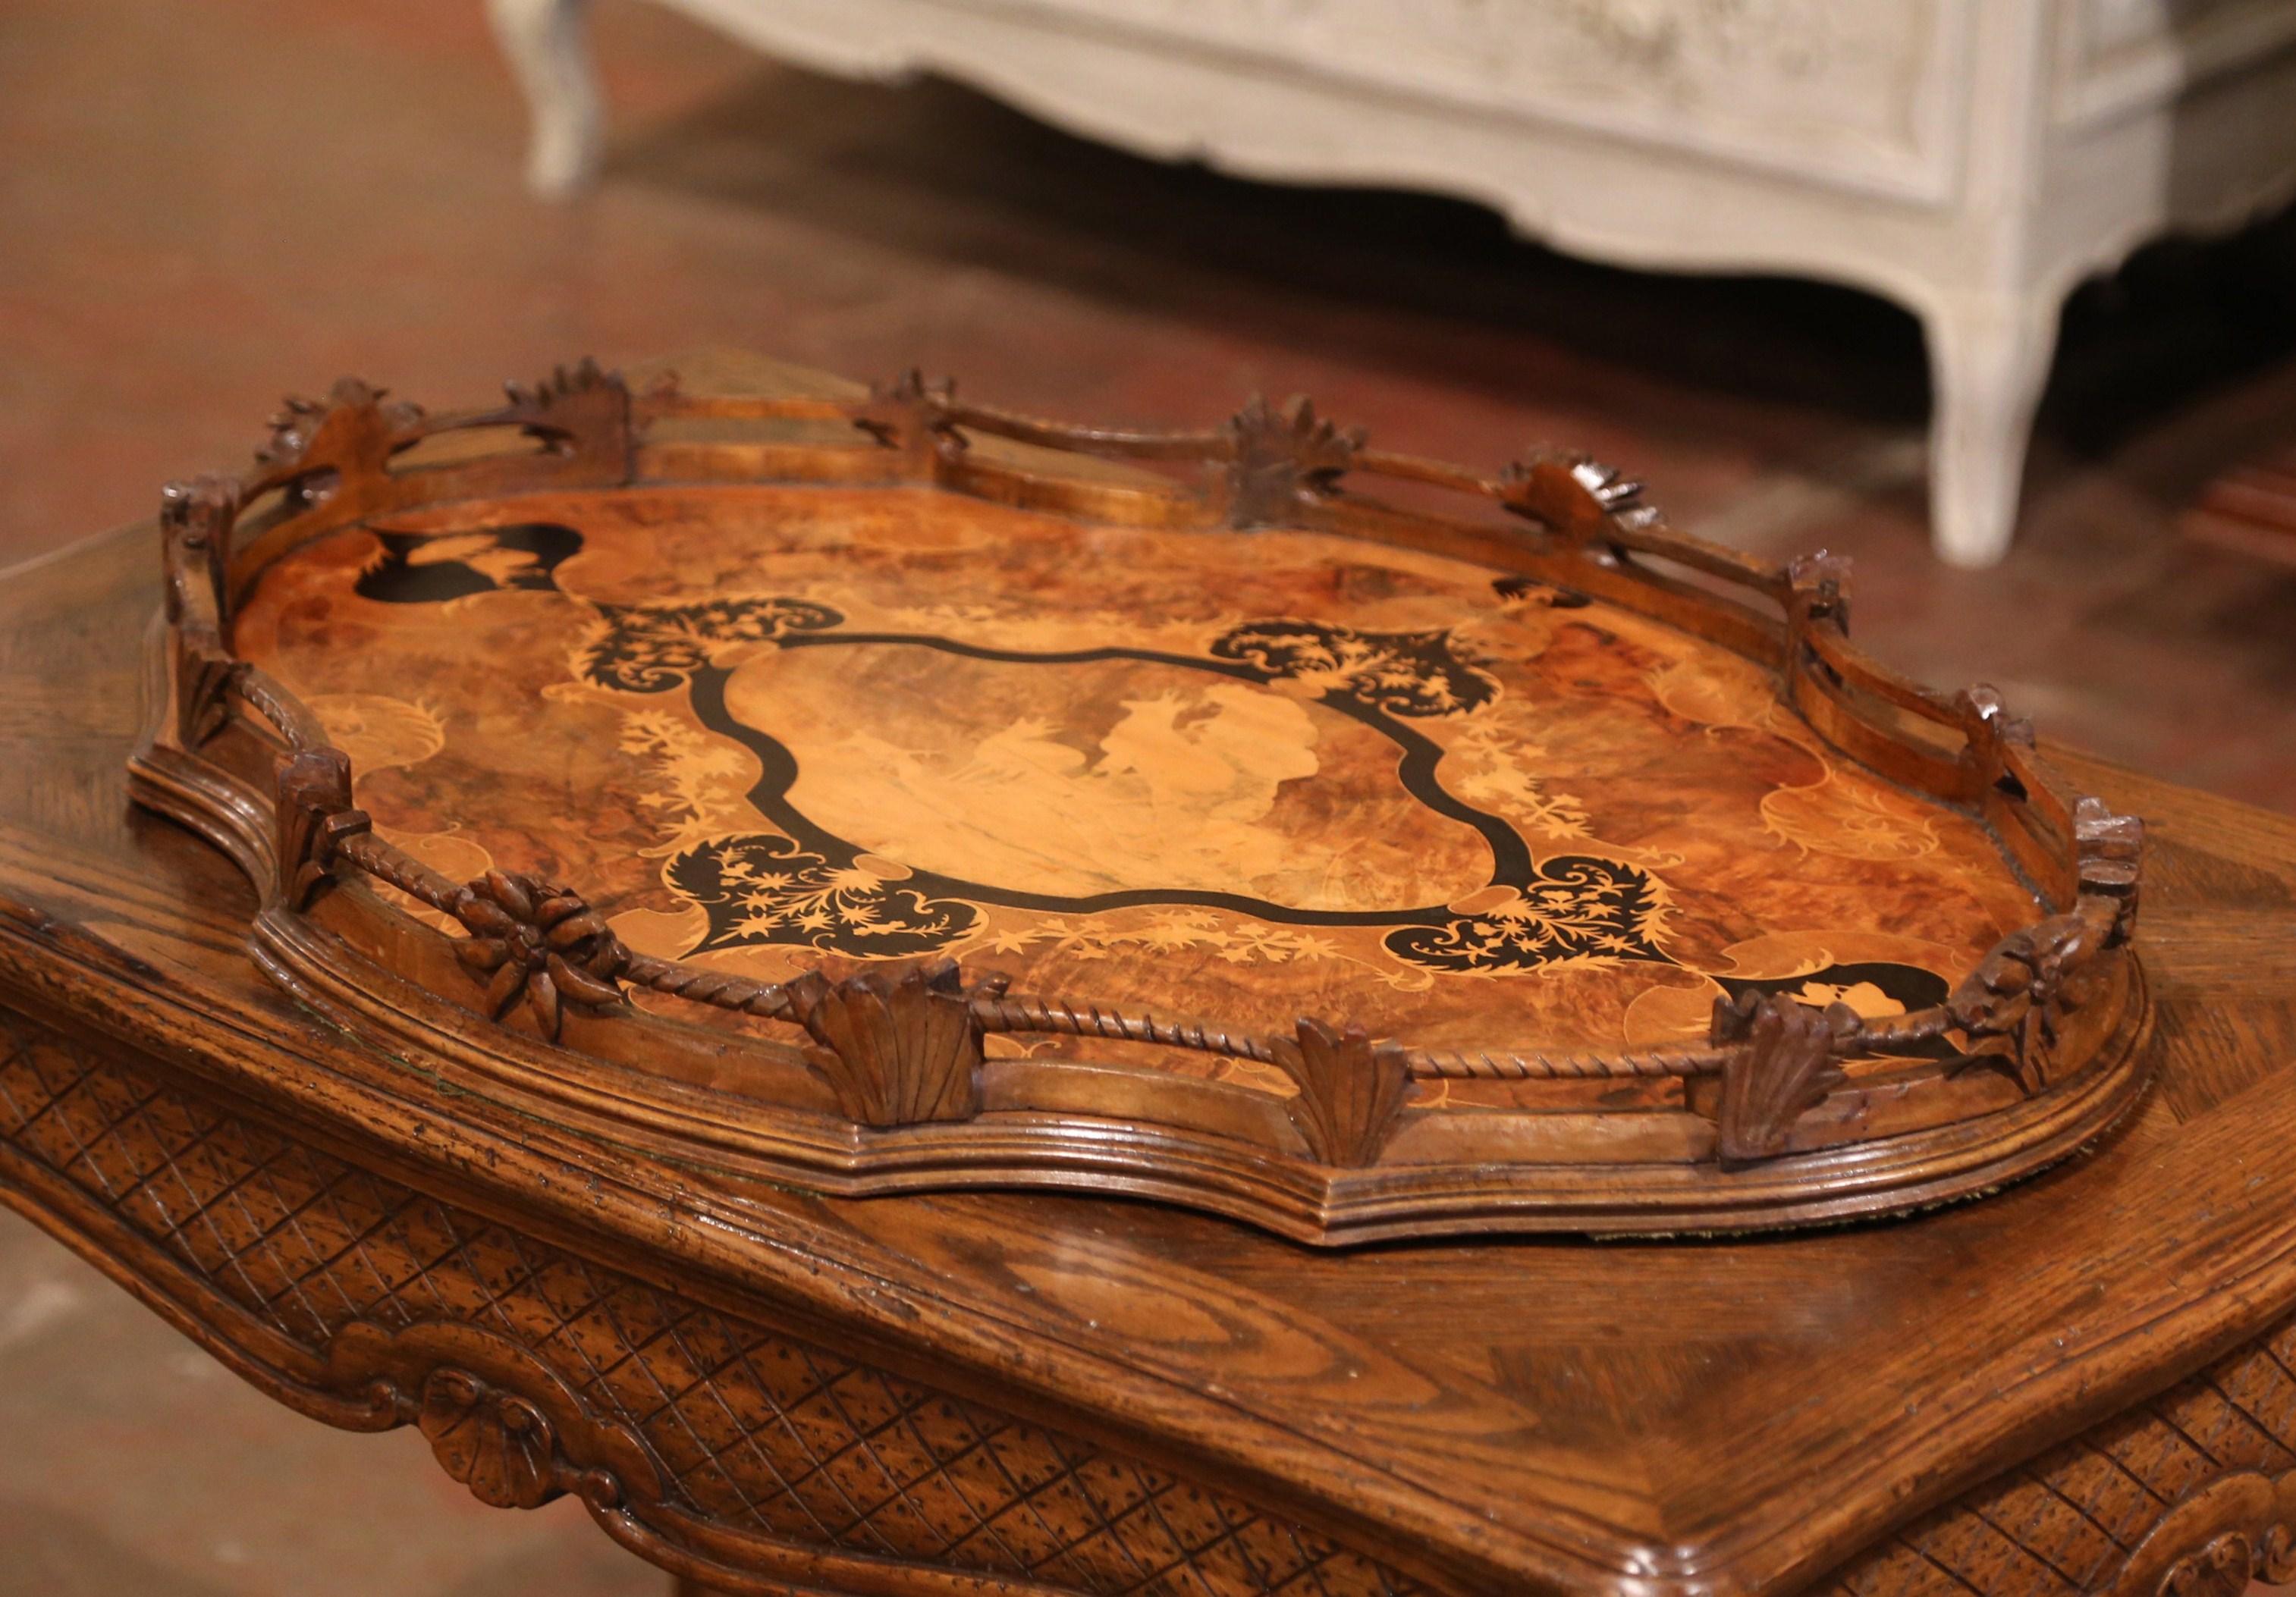 Crafted in Switzerland, circa 1870, and oval in shape, the large antique tray features a shaped top with a carved gallery decorated with floral and leaf motifs. The center medallion with deer standing on rocky ground has beautiful, illustrative